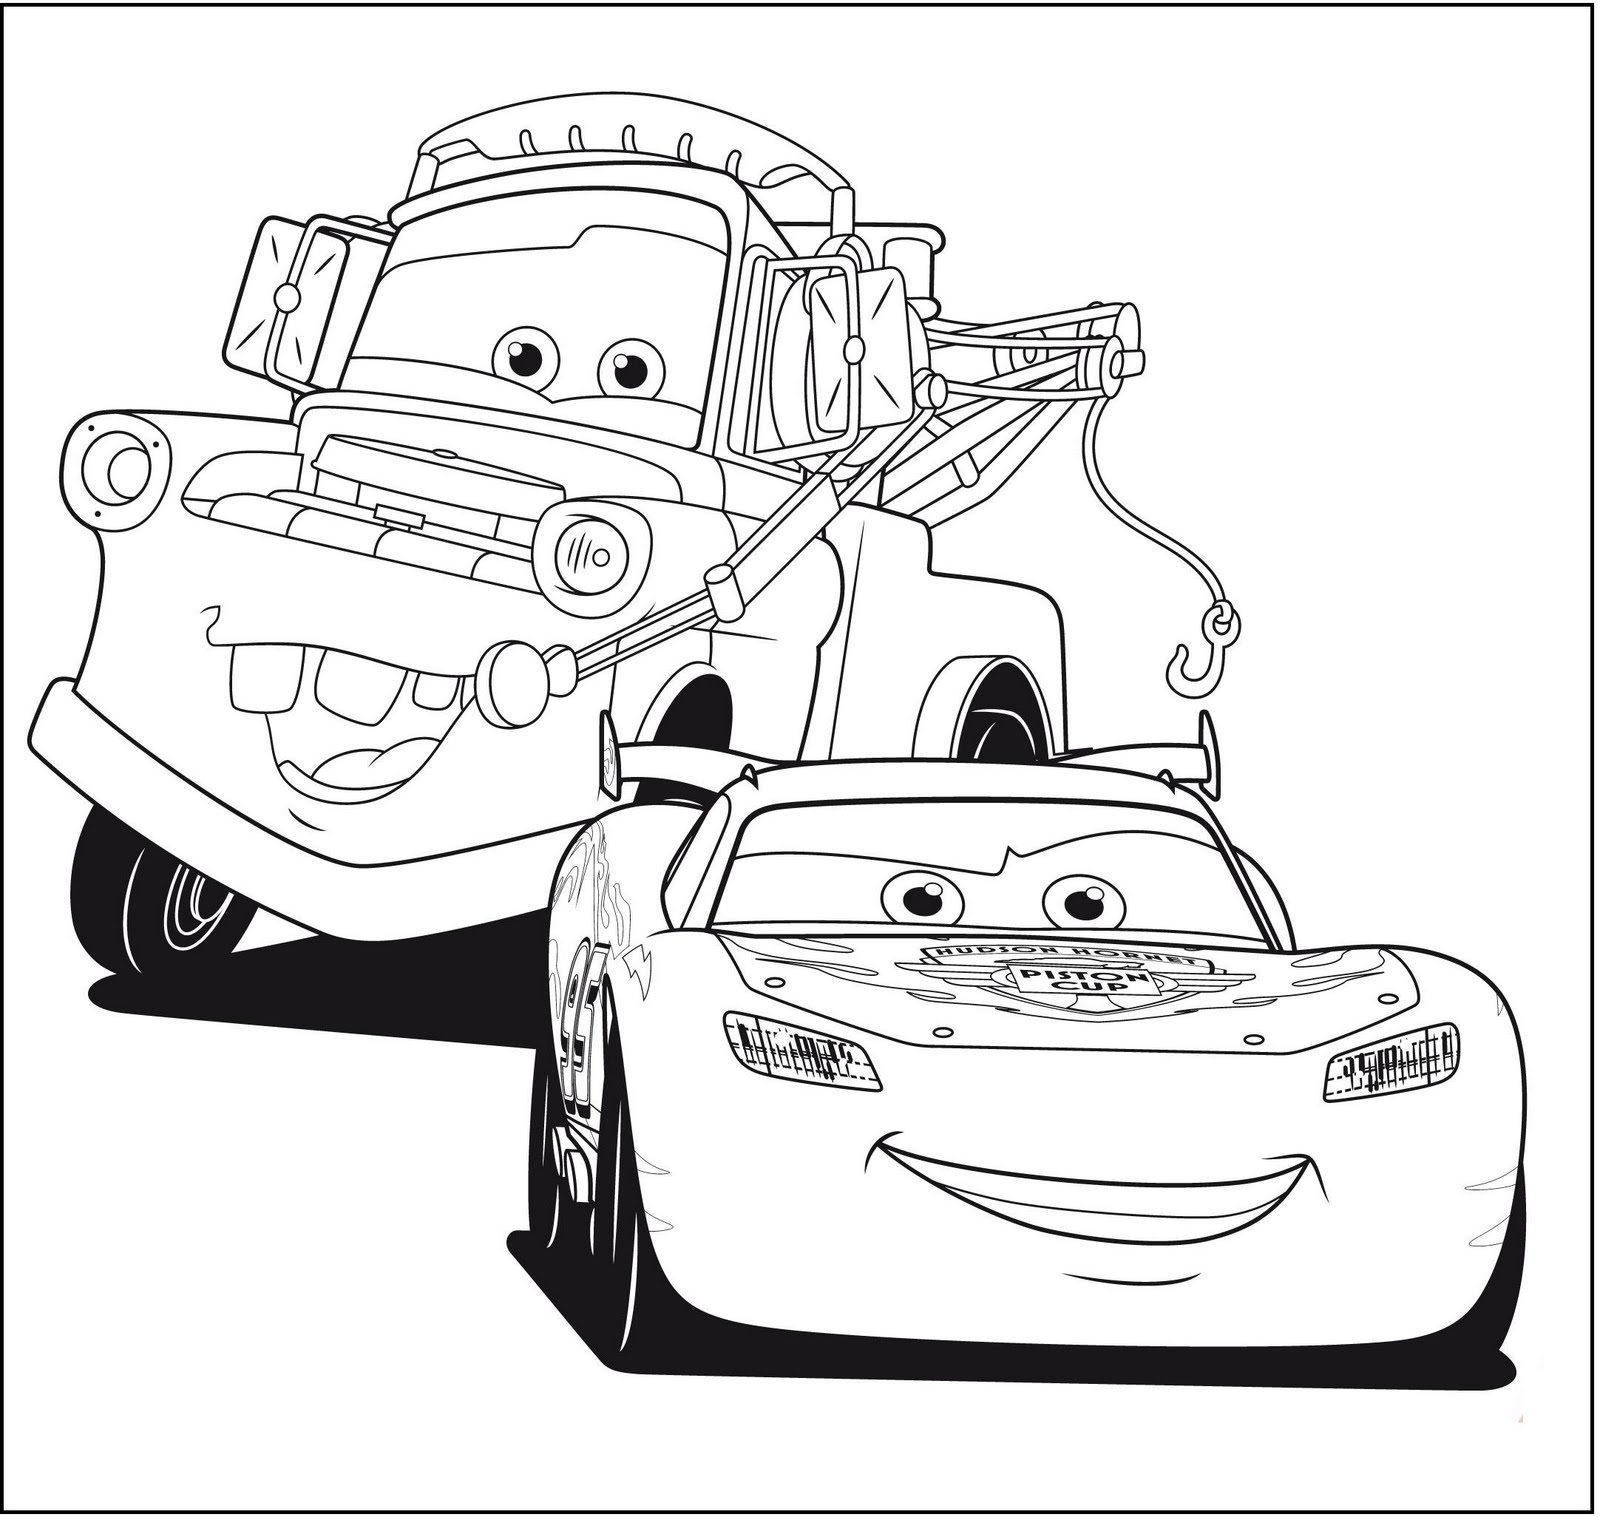 Disney Cars Coloring Pages Free Large Images aGzF20u   Clipart Suggest